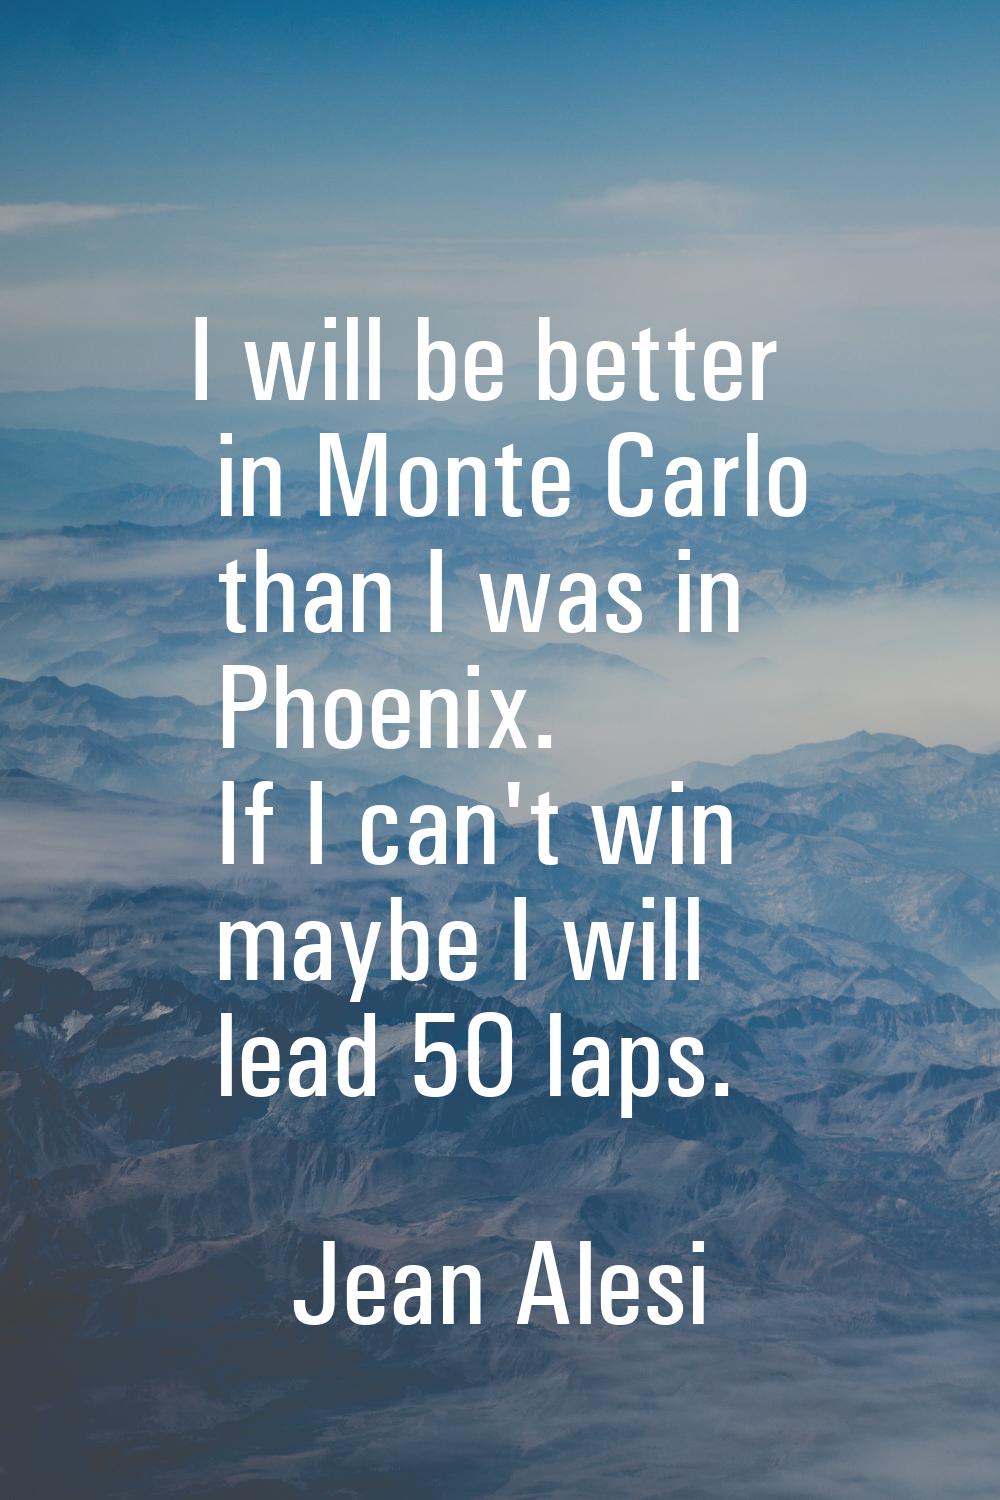 I will be better in Monte Carlo than I was in Phoenix. If I can't win maybe I will lead 50 laps.